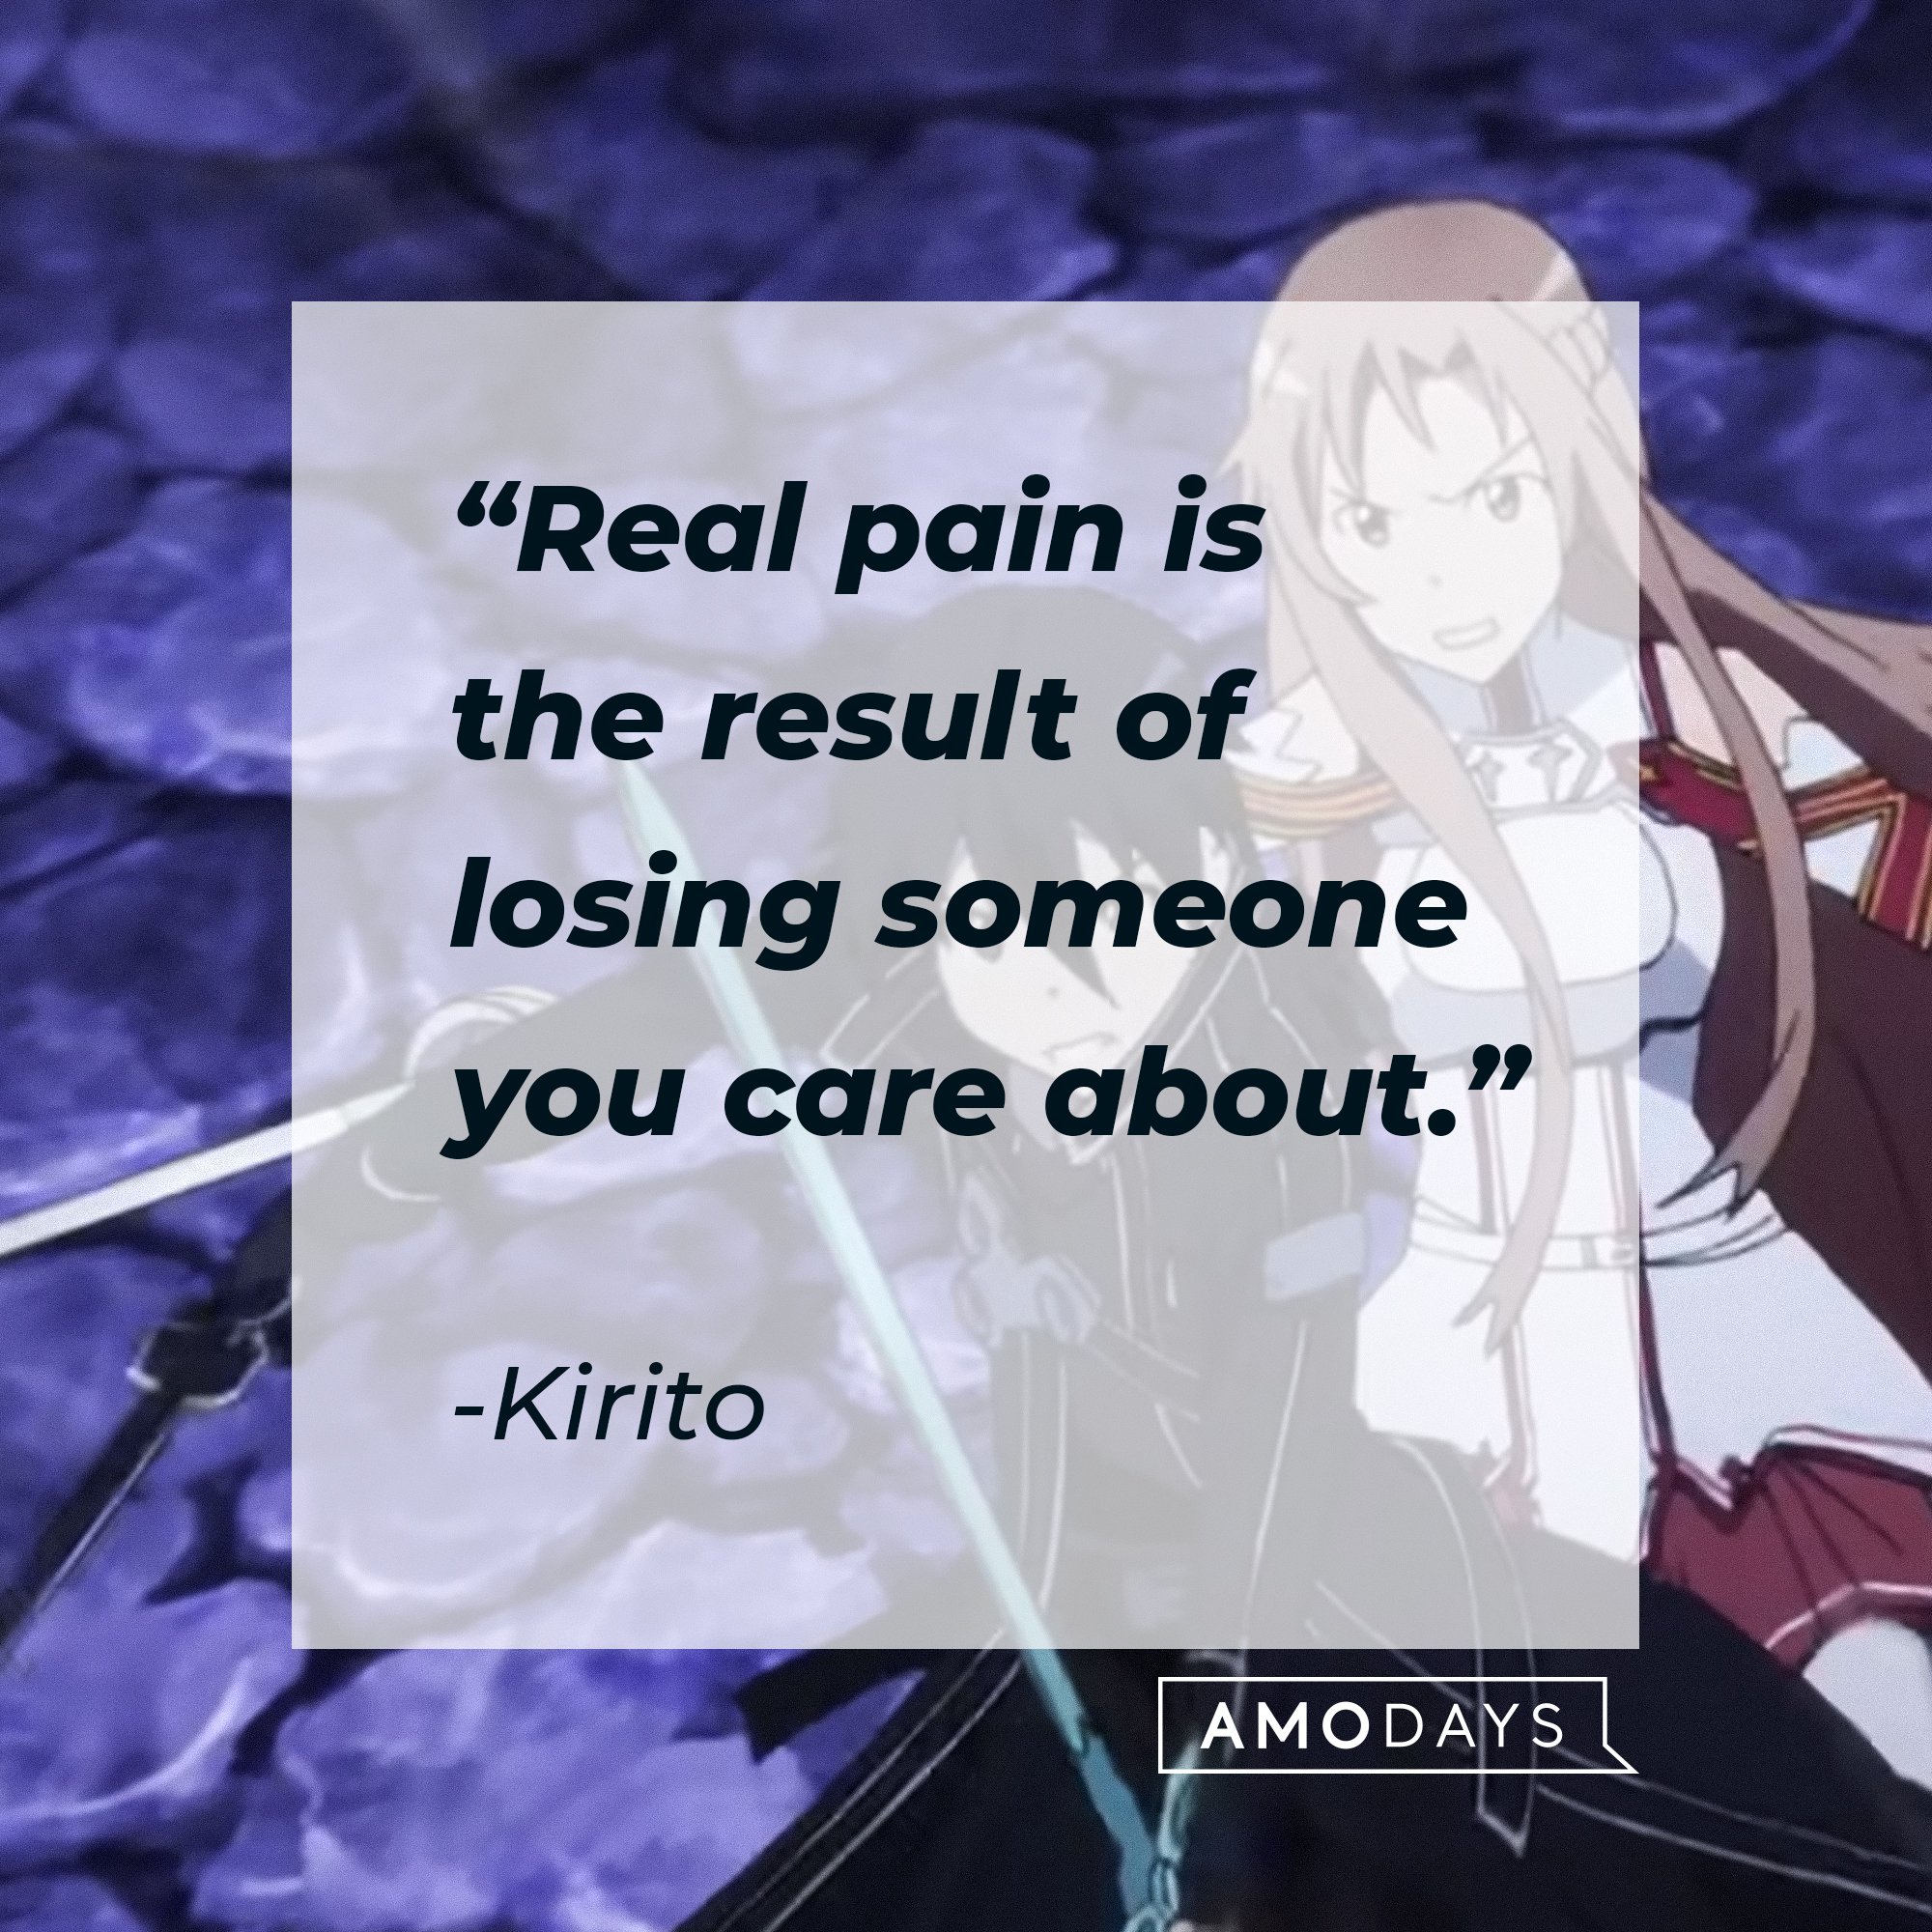 Kirito’s quote: “Real pain is the result of losing someone you care about.”  | Image: AmoDays